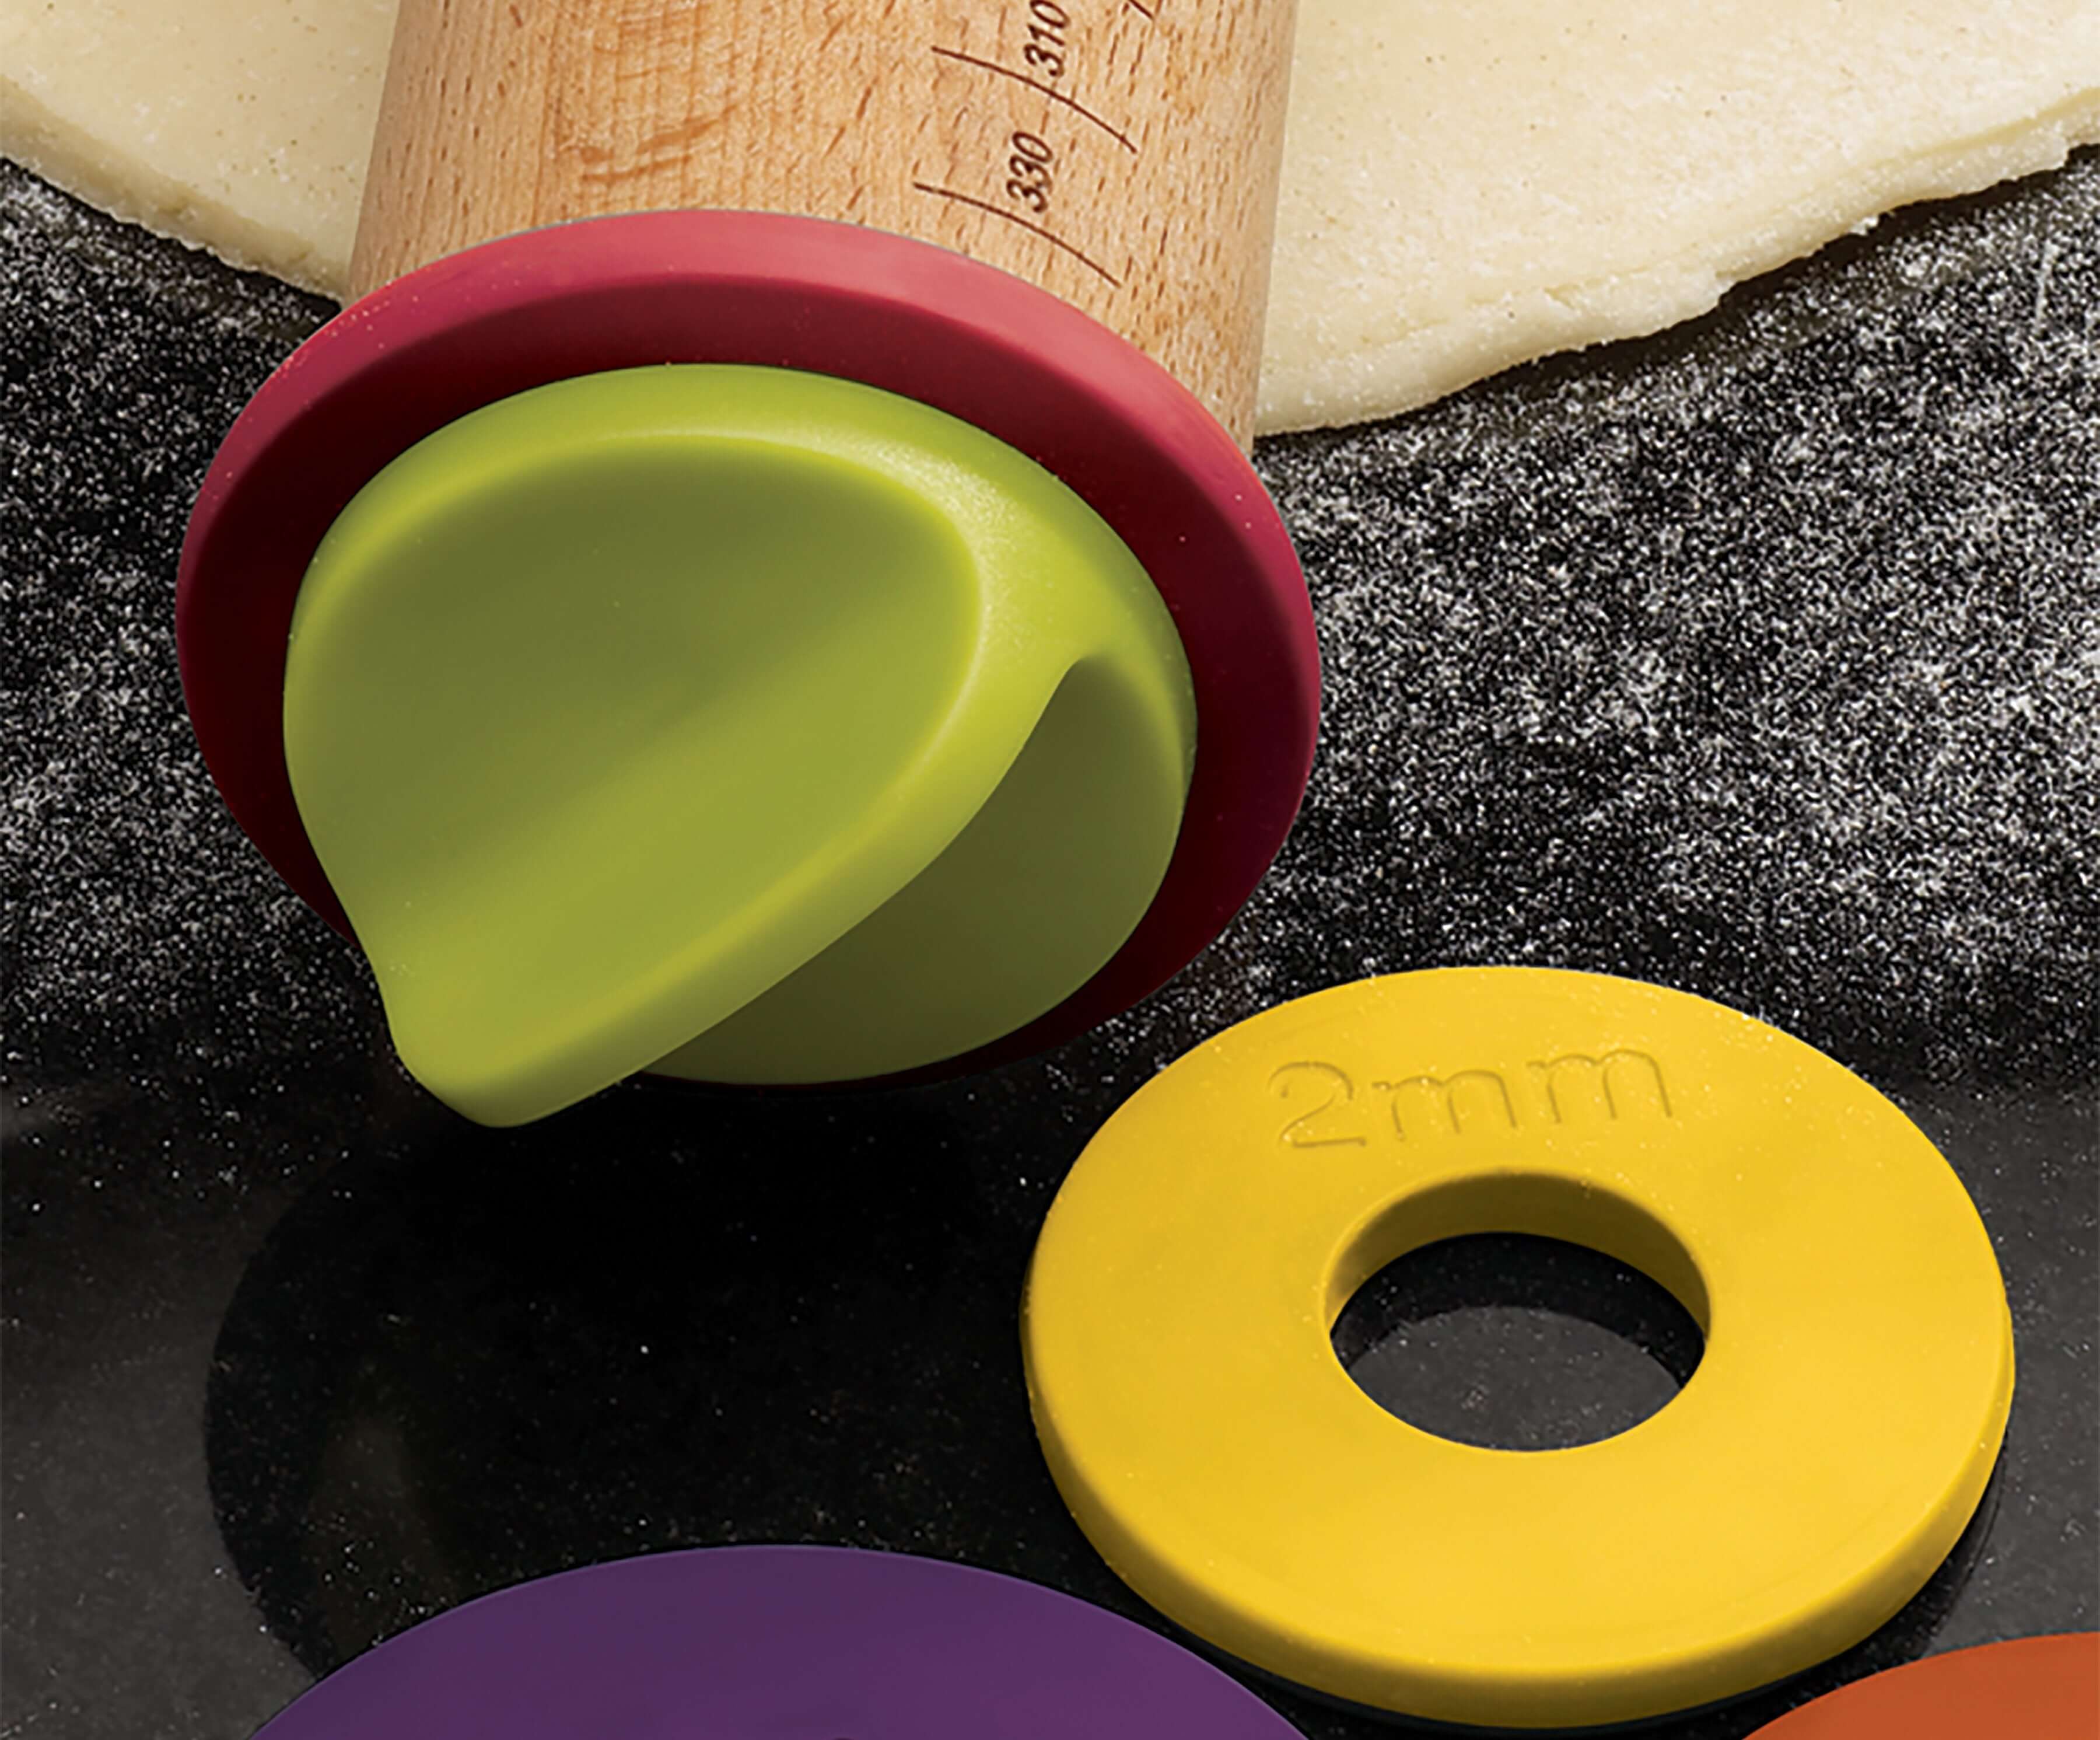 BEON.COM.AU  This innovative rolling pin takes the guesswork out of preparing dough and pastry with 4 sets of rolling pin rings that raise the rolling surface by different amounts, to create exactly the required pastry thickness.  4 sets of removable discs that raise the rolling surface by different amounts ... Joseph Joseph at BEON.COM.AU